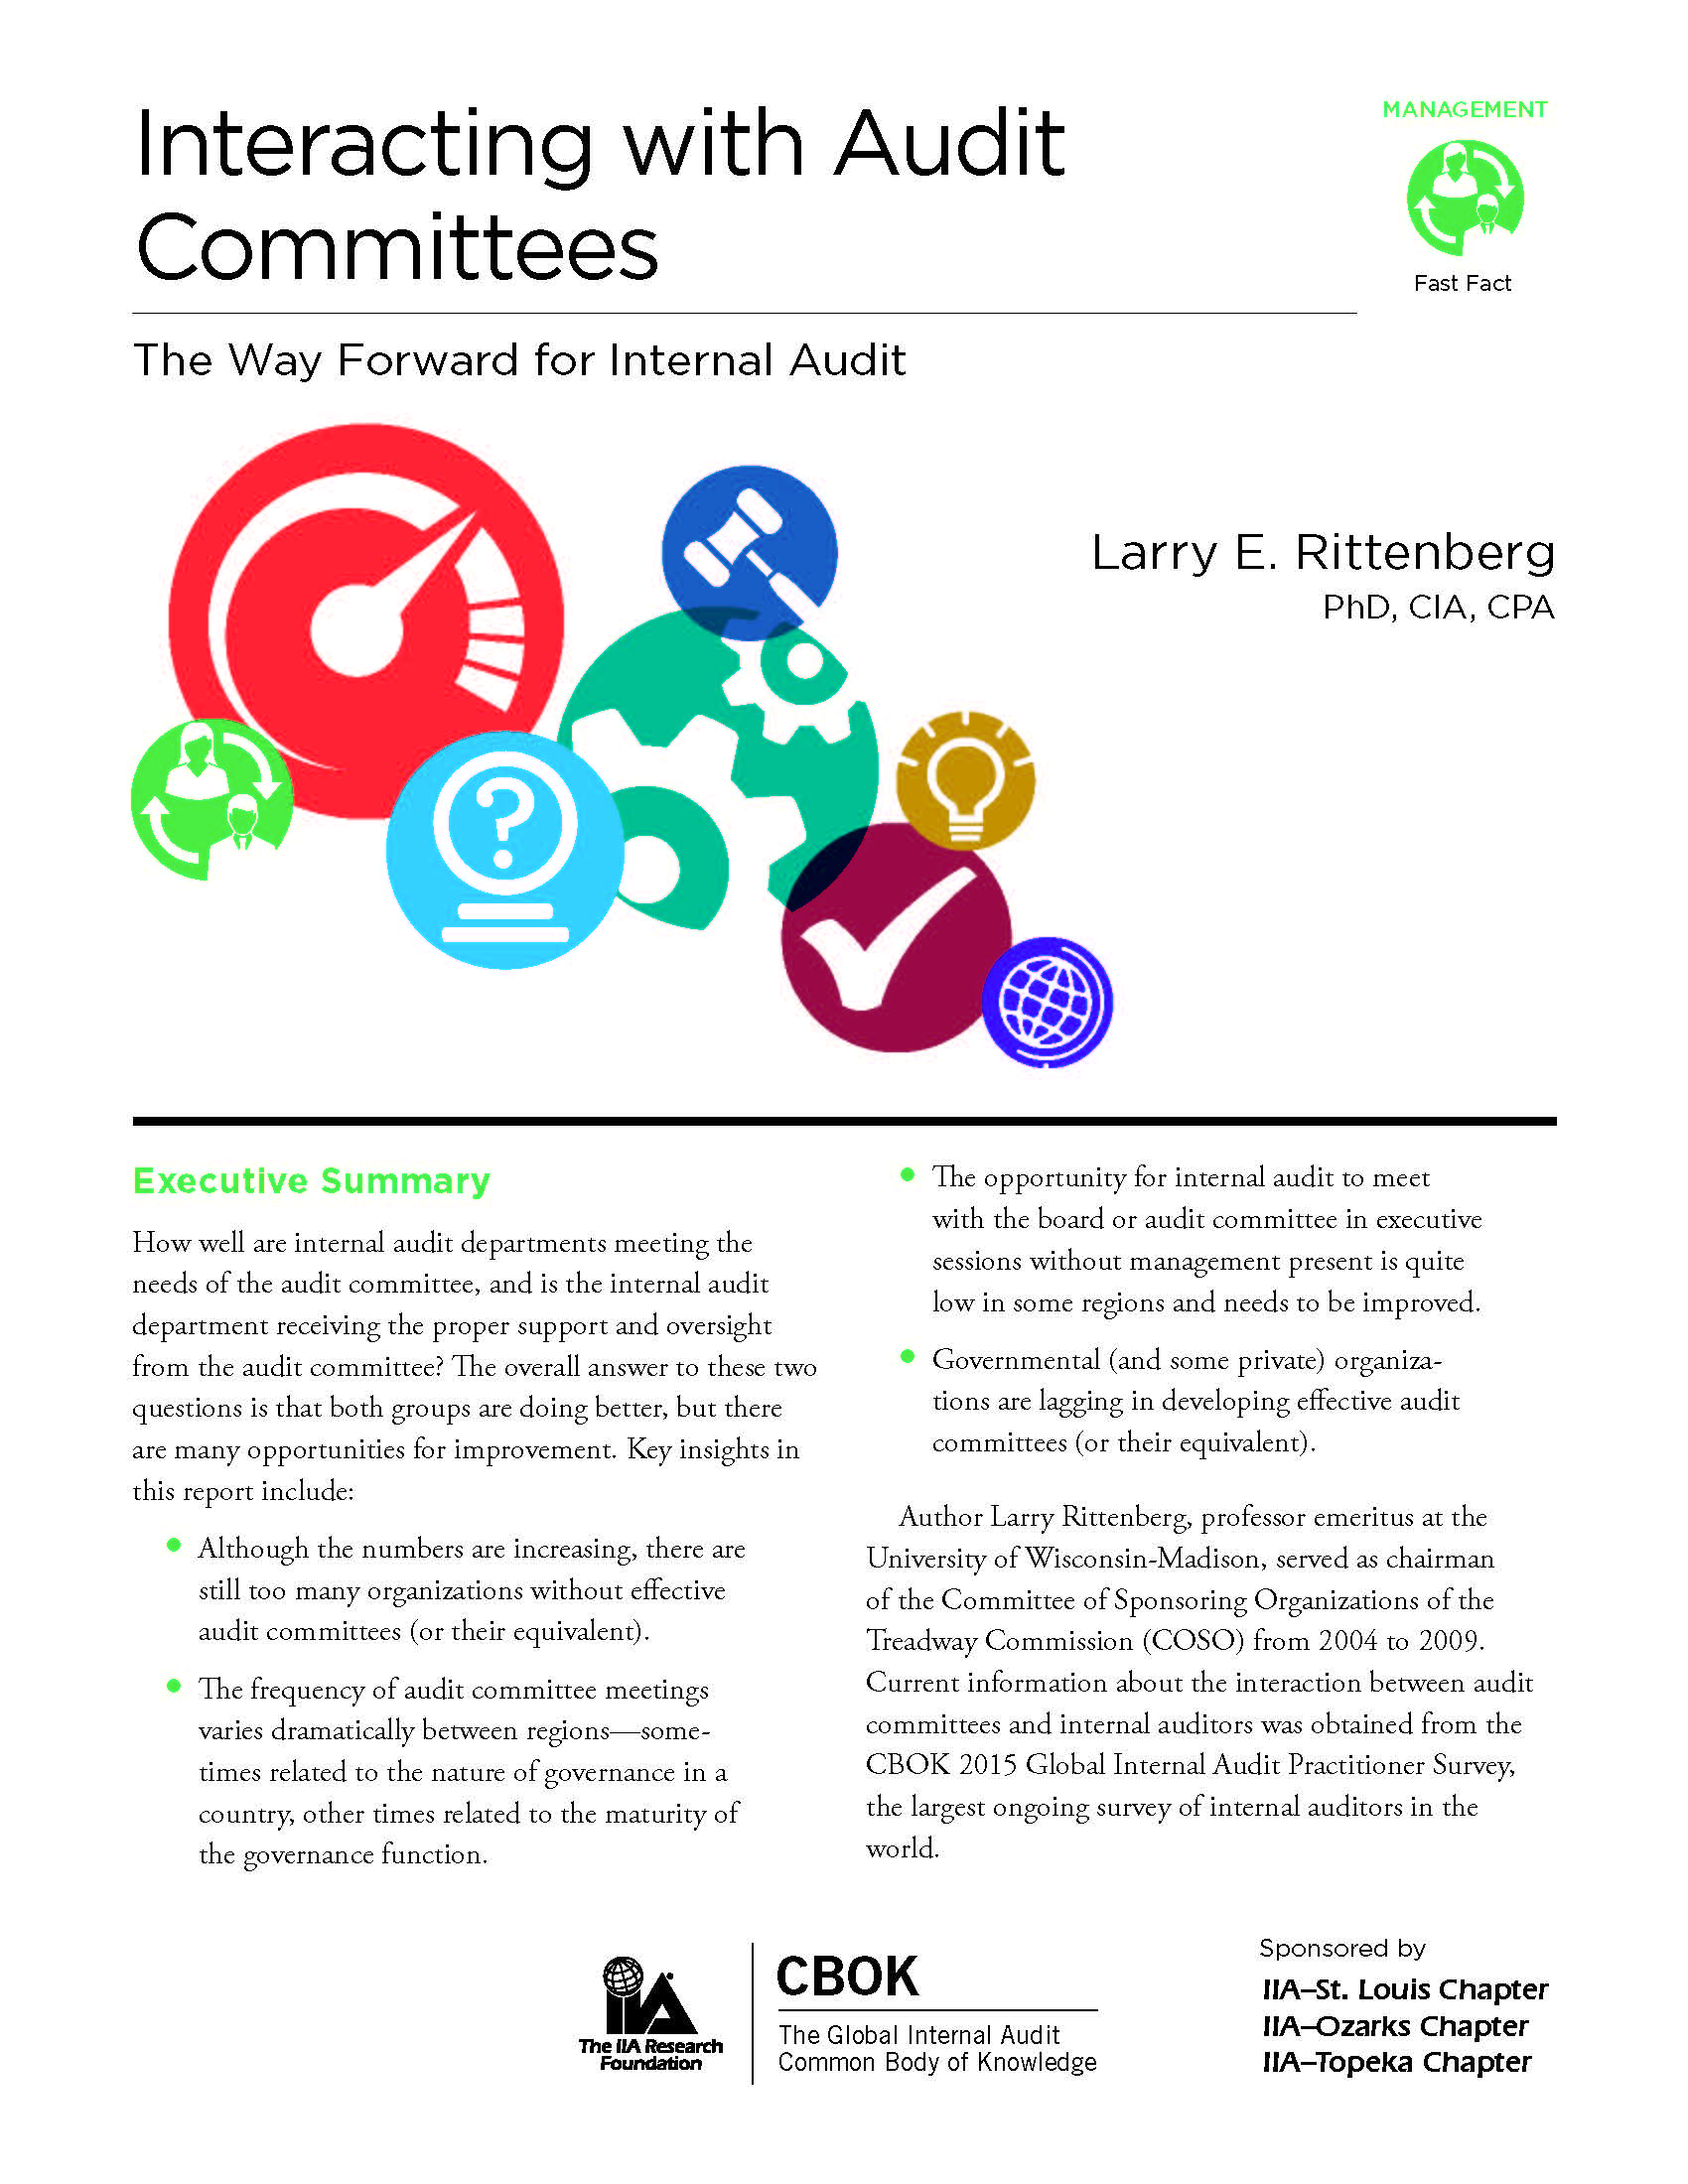 Interacting with Audit Committees: The Way Forward for Internal Audit